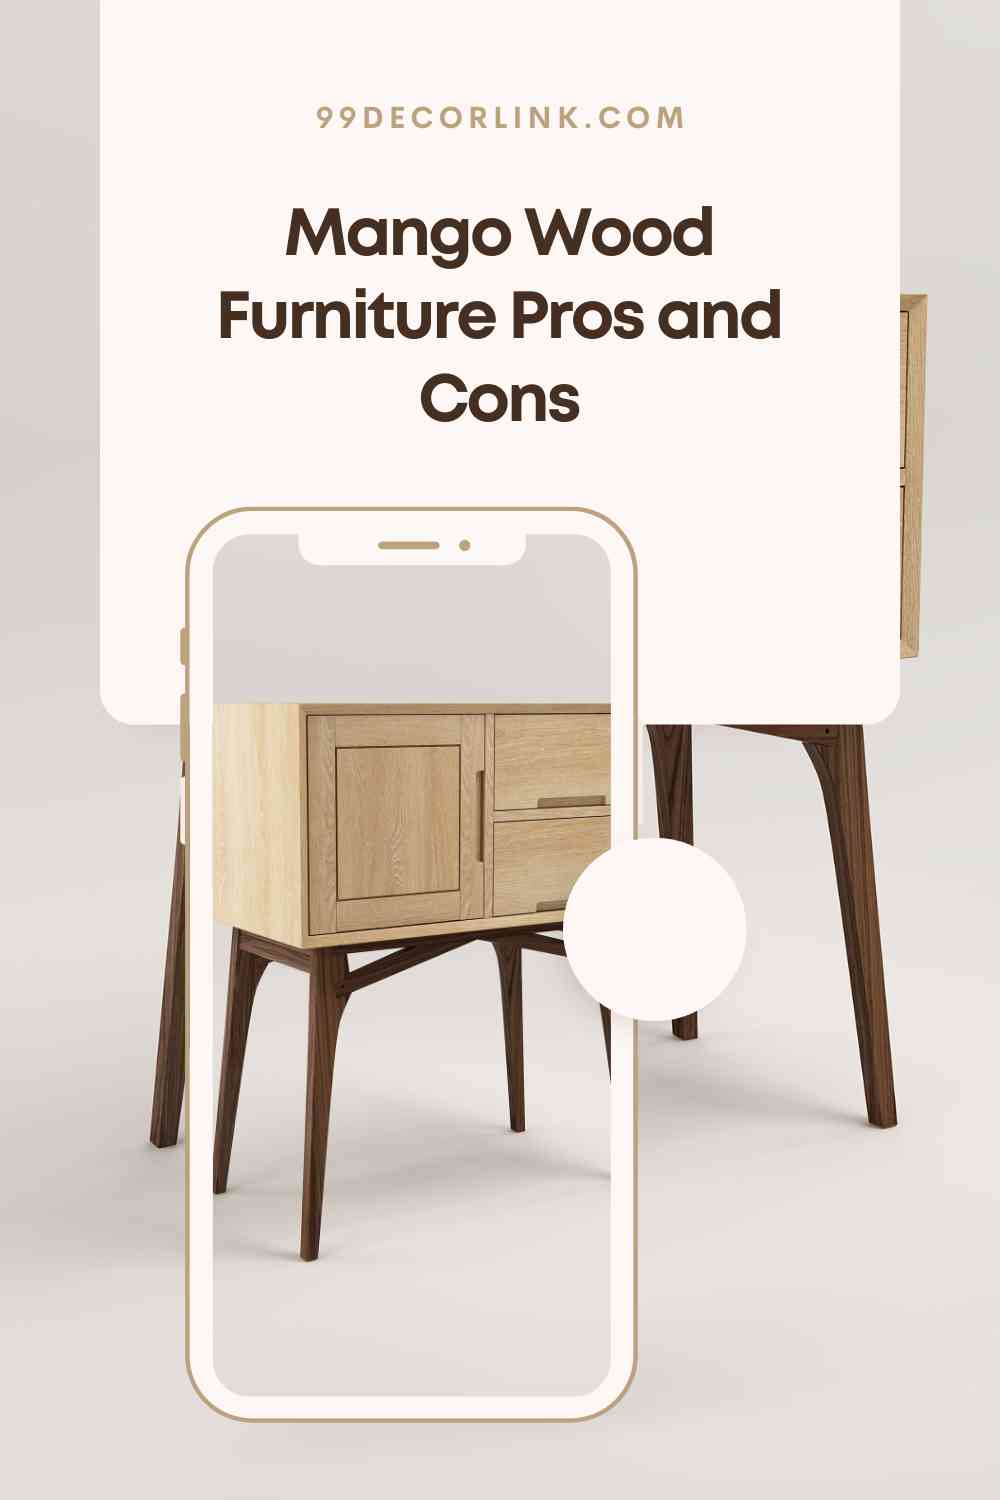 Mango Wood Furniture Pros and Cons pin